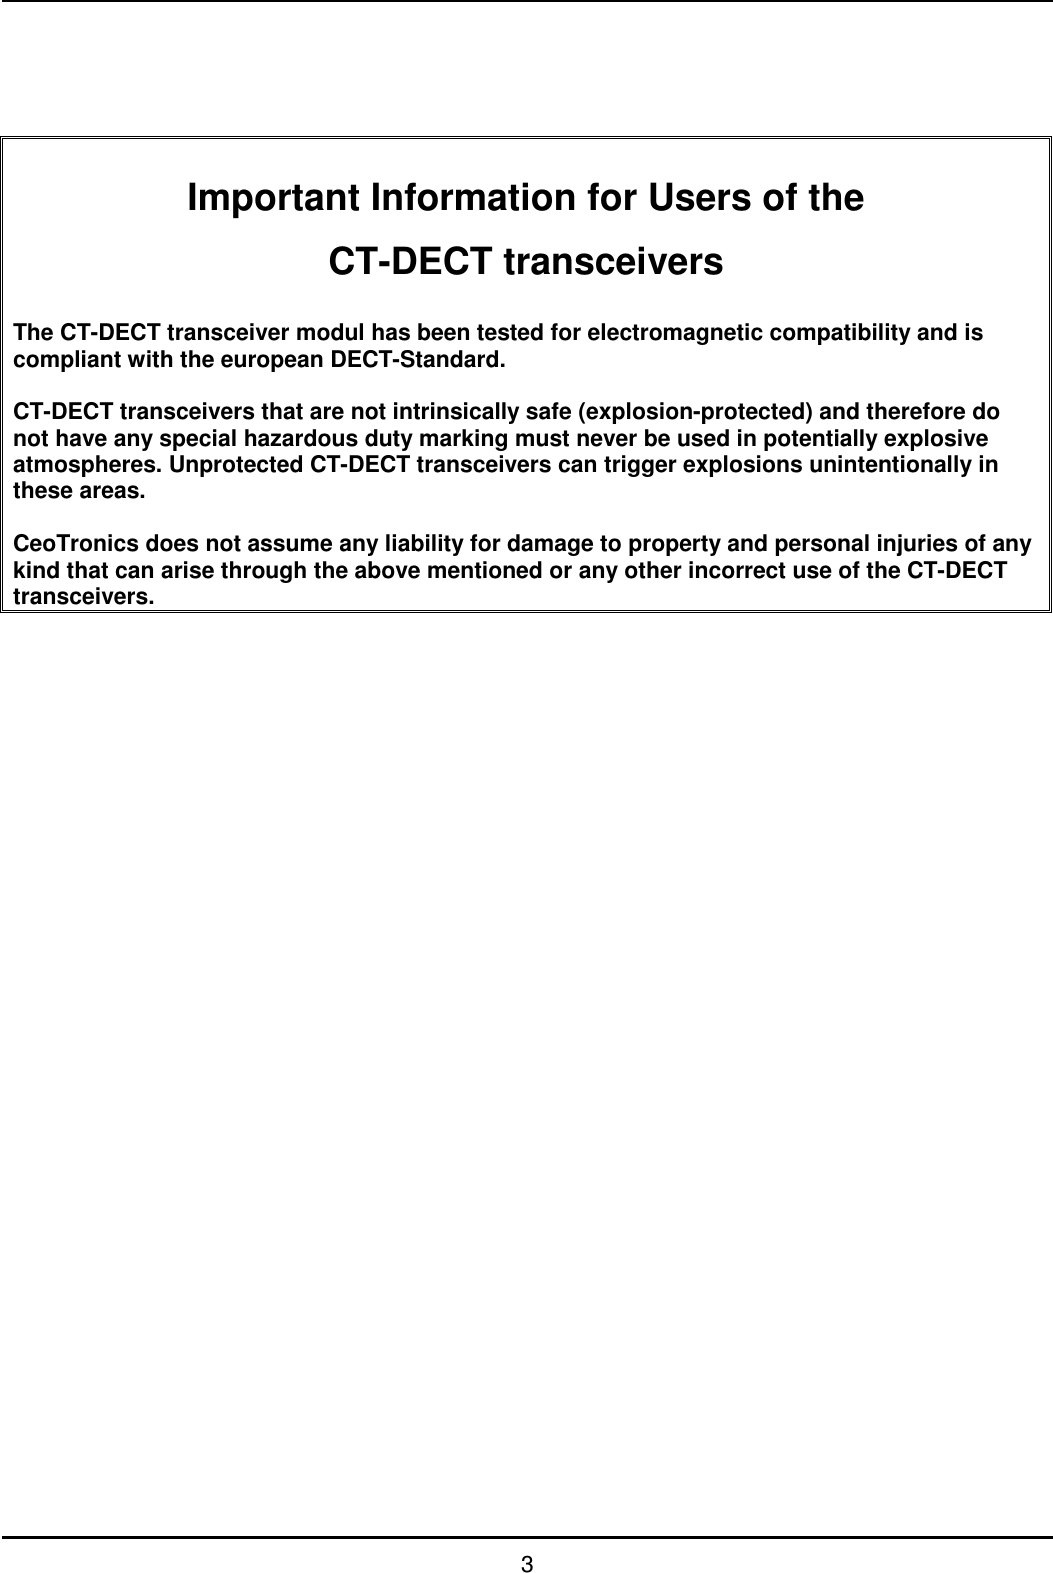   3      Important Information for Users of the CT-DECT transceivers  The CT-DECT transceiver modul has been tested for electromagnetic compatibility and is compliant with the european DECT-Standard.   CT-DECT transceivers that are not intrinsically safe (explosion-protected) and therefore do not have any special hazardous duty marking must never be used in potentially explosive atmospheres. Unprotected CT-DECT transceivers can trigger explosions unintentionally in these areas.  CeoTronics does not assume any liability for damage to property and personal injuries of any kind that can arise through the above mentioned or any other incorrect use of the CT-DECT transceivers.                                   